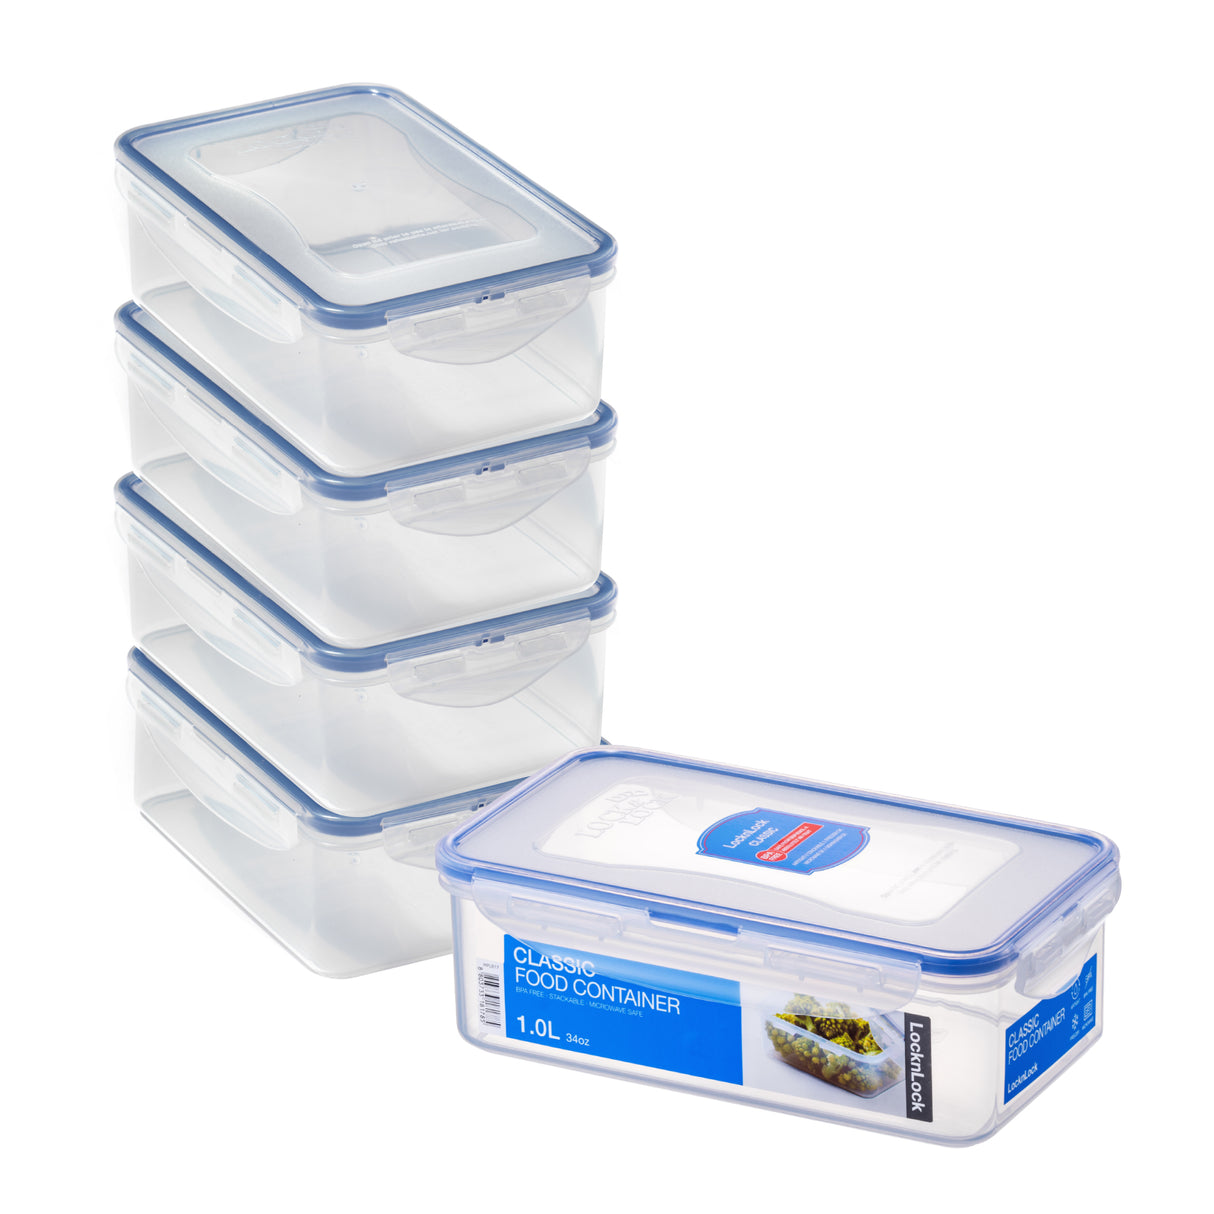 LocknLock Rectangular Food Containers with Lids, 5 x 1L